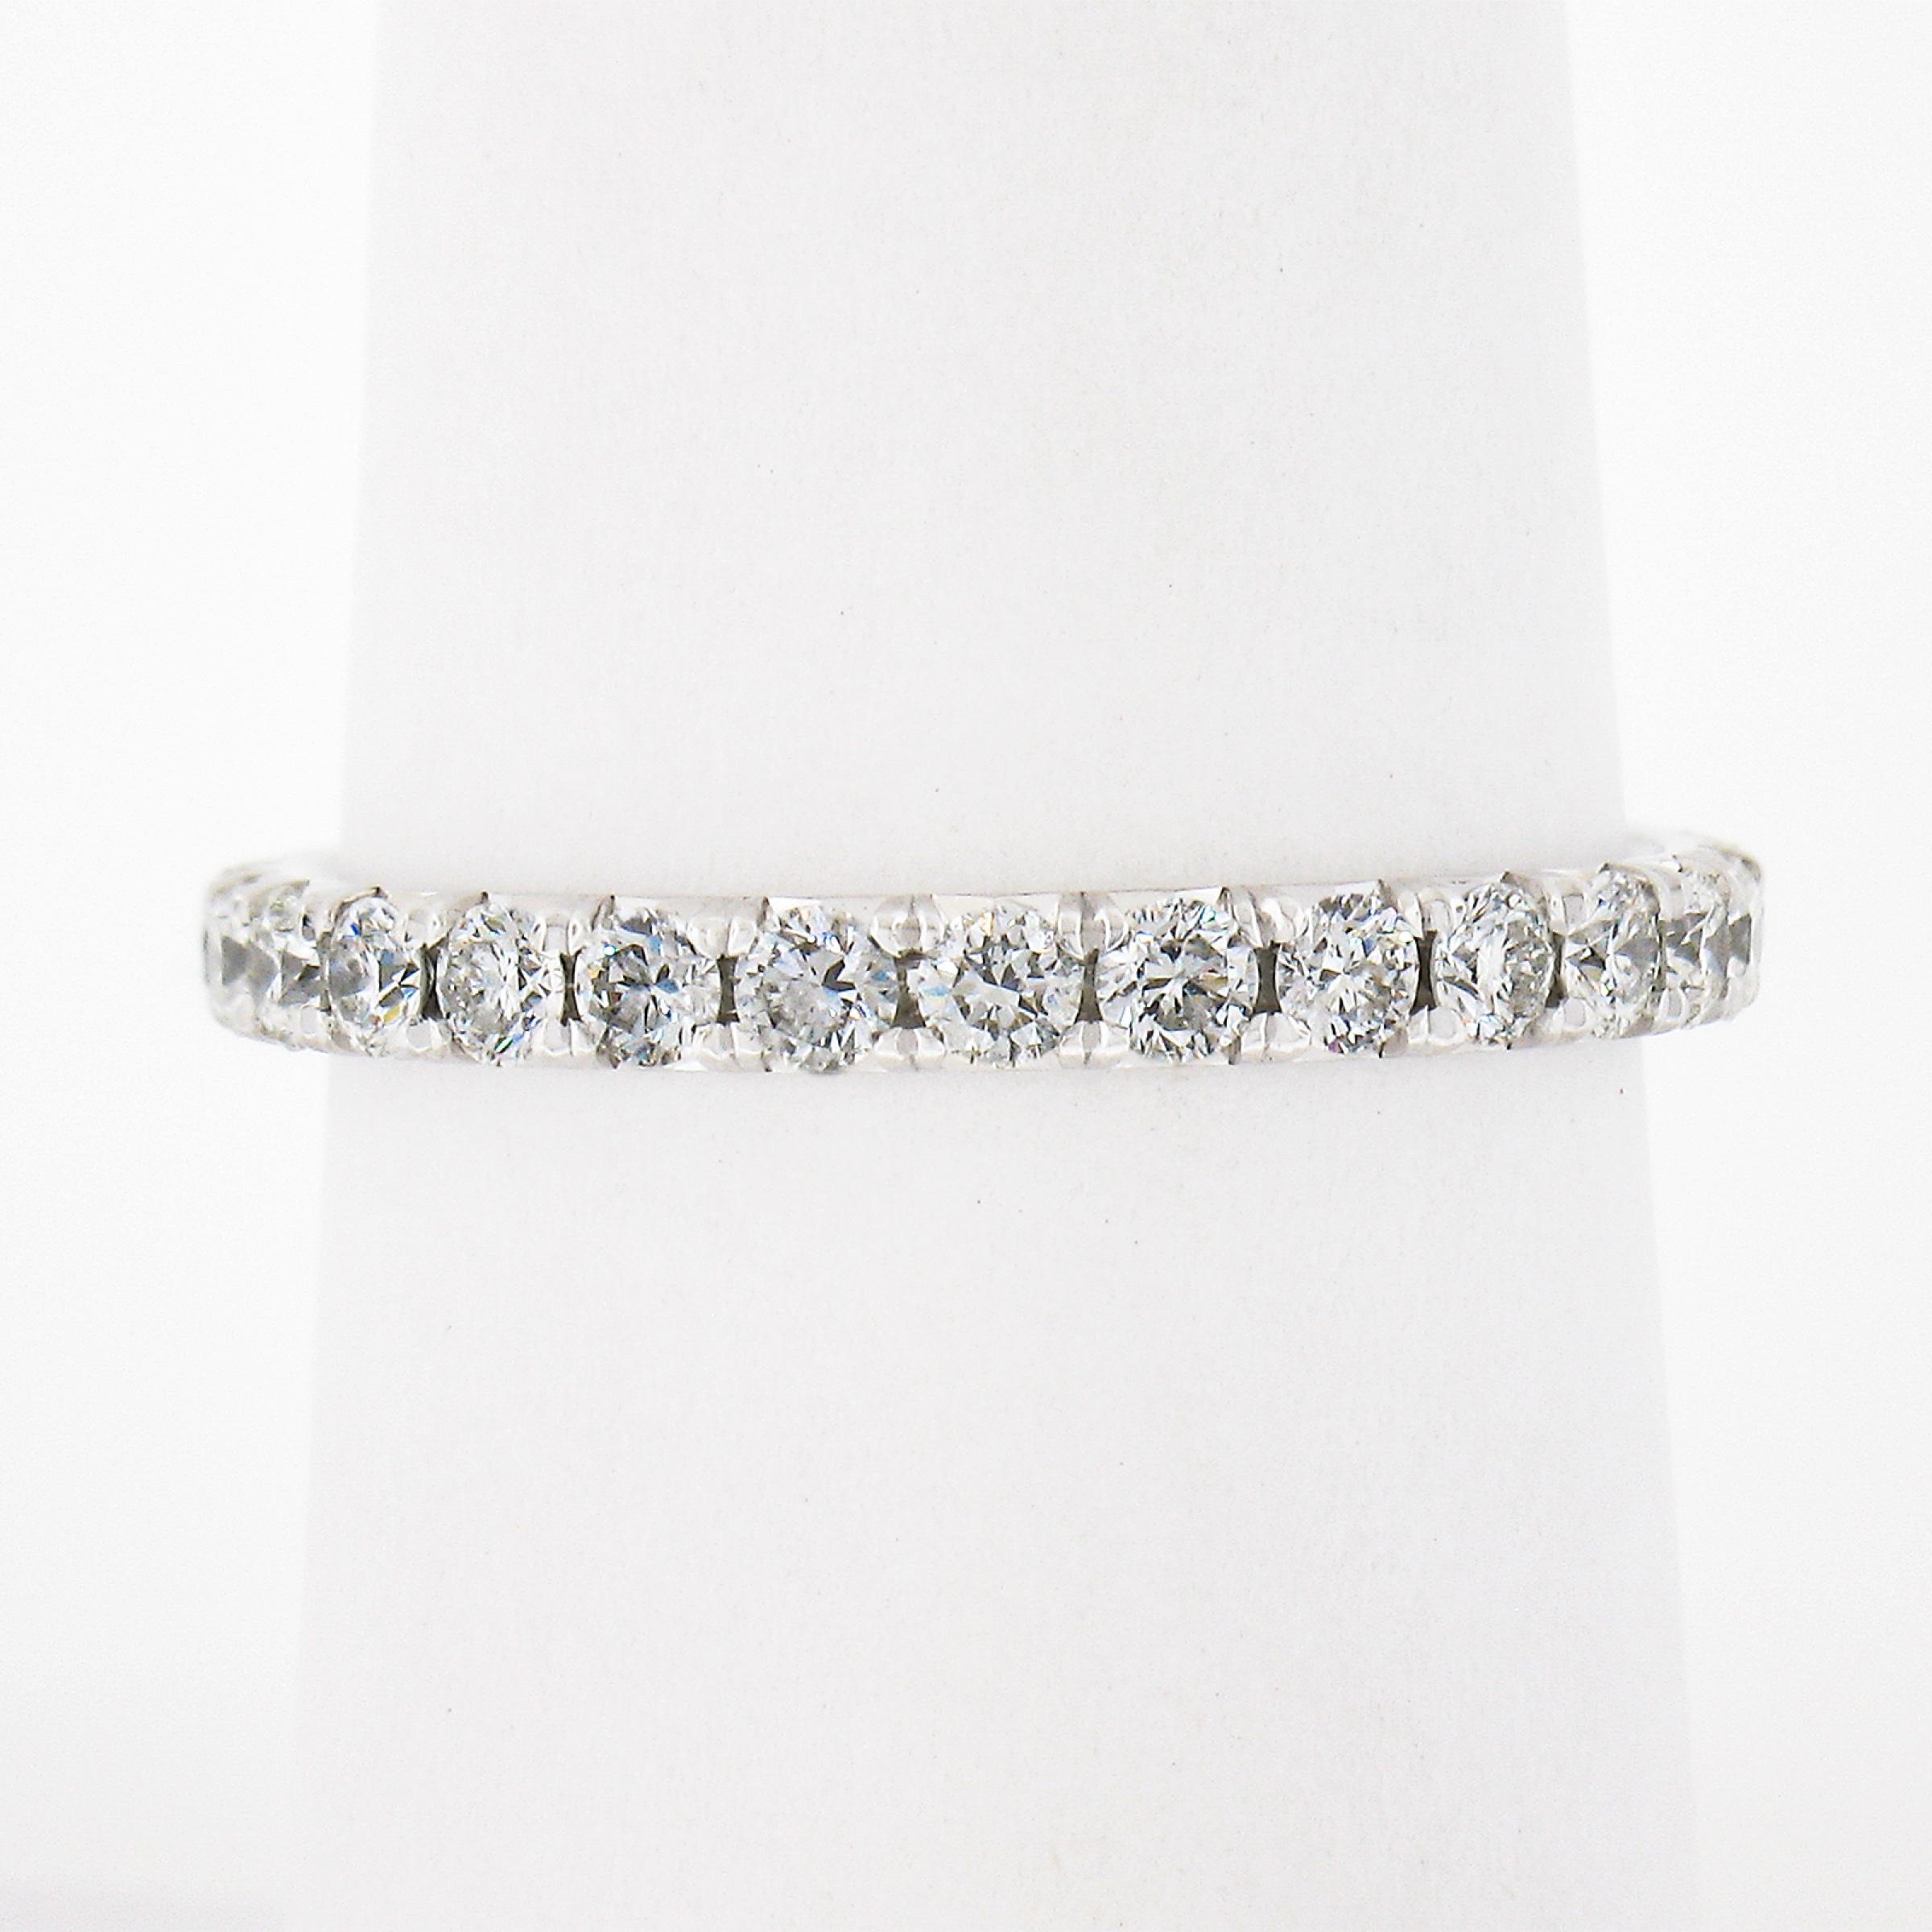 This Blue Nile eternity band ring was crafted from solid .950 platinum and features 27 round brilliant cut diamonds neatly French pave set entirely around band. This well made eternity band ring has a thin and delicate look on the finger and would